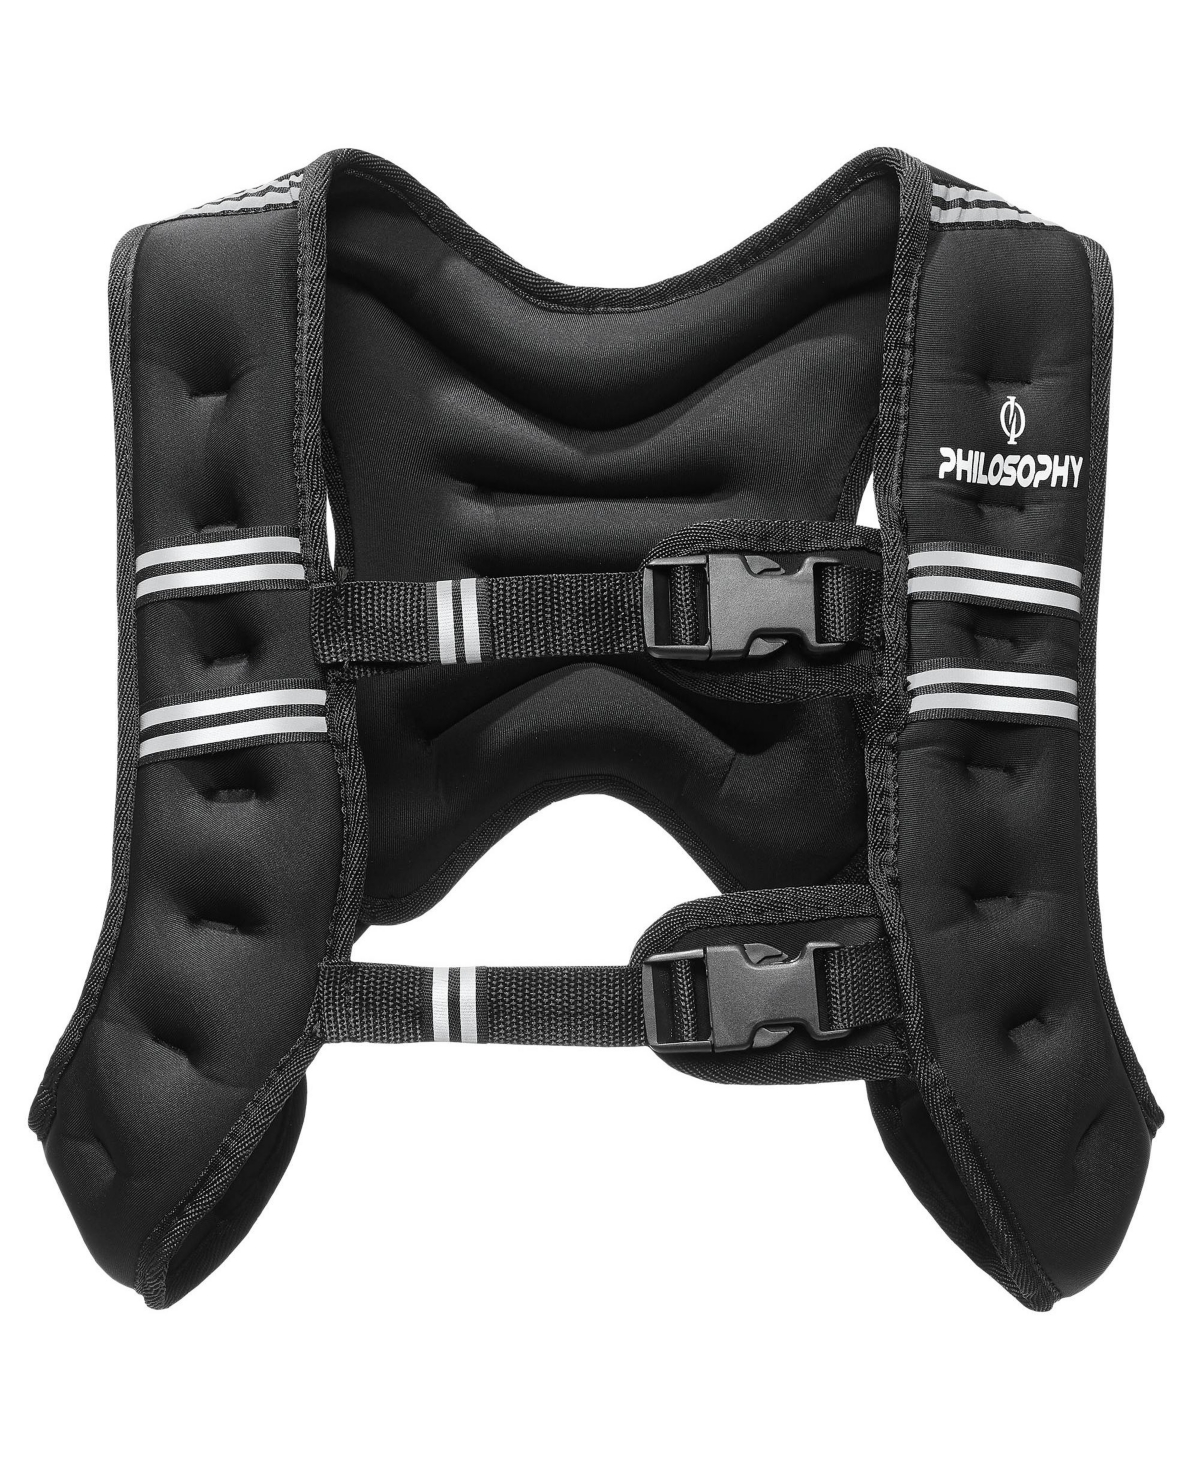 Weighted Workout Vest 6 Lb, Strength Training Fitness Body Weight Vest - Black